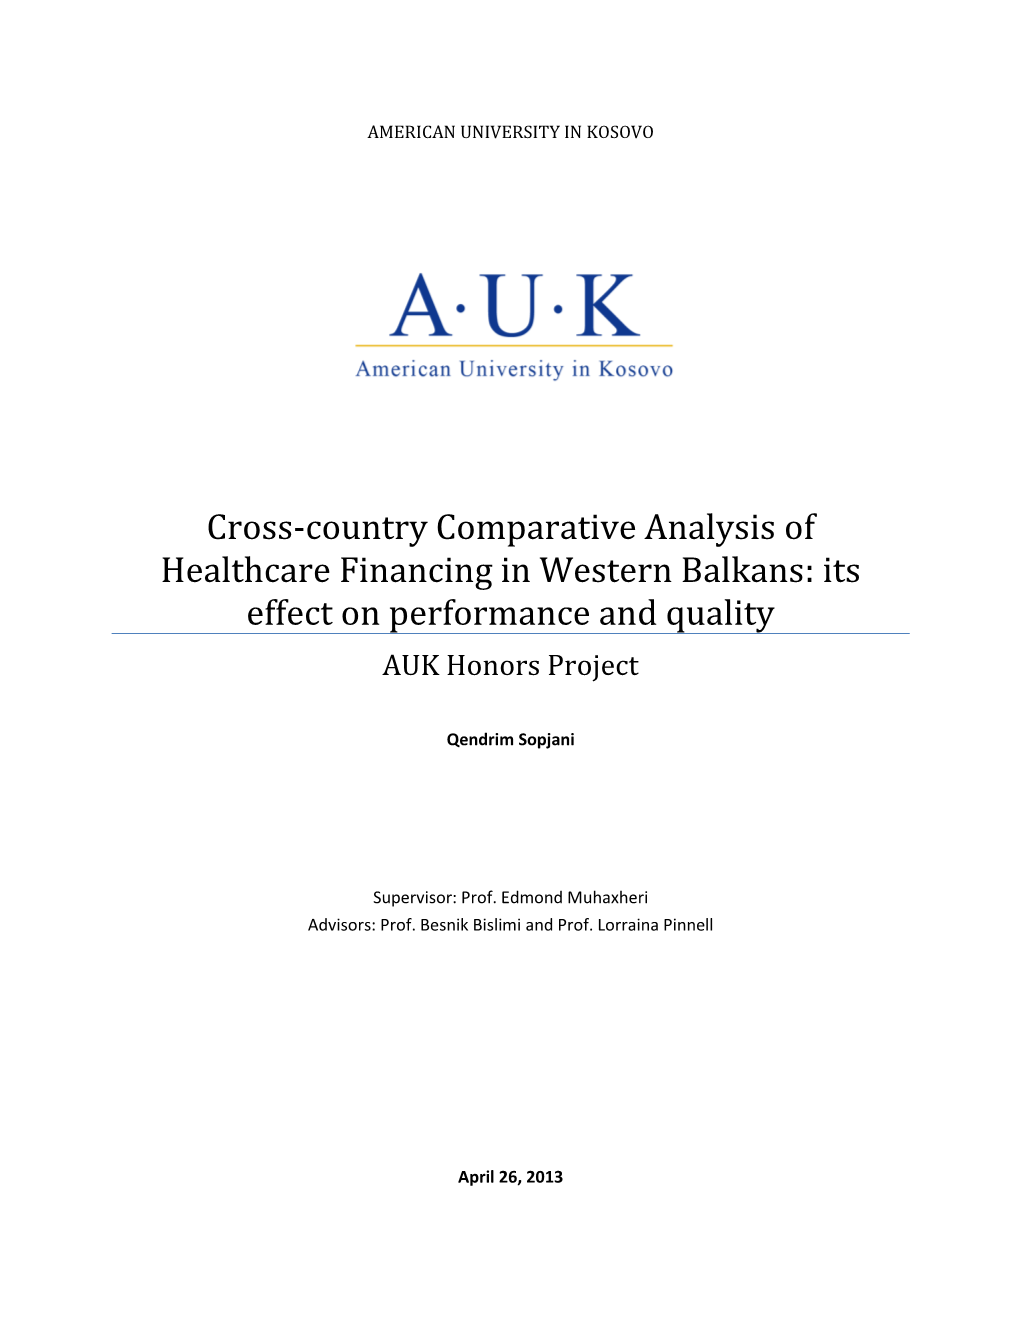 Cross-Country Comparative Analysis of Healthcare Financing in Western Balkans: Its Effect on Performance and Quality AUK Honors Project